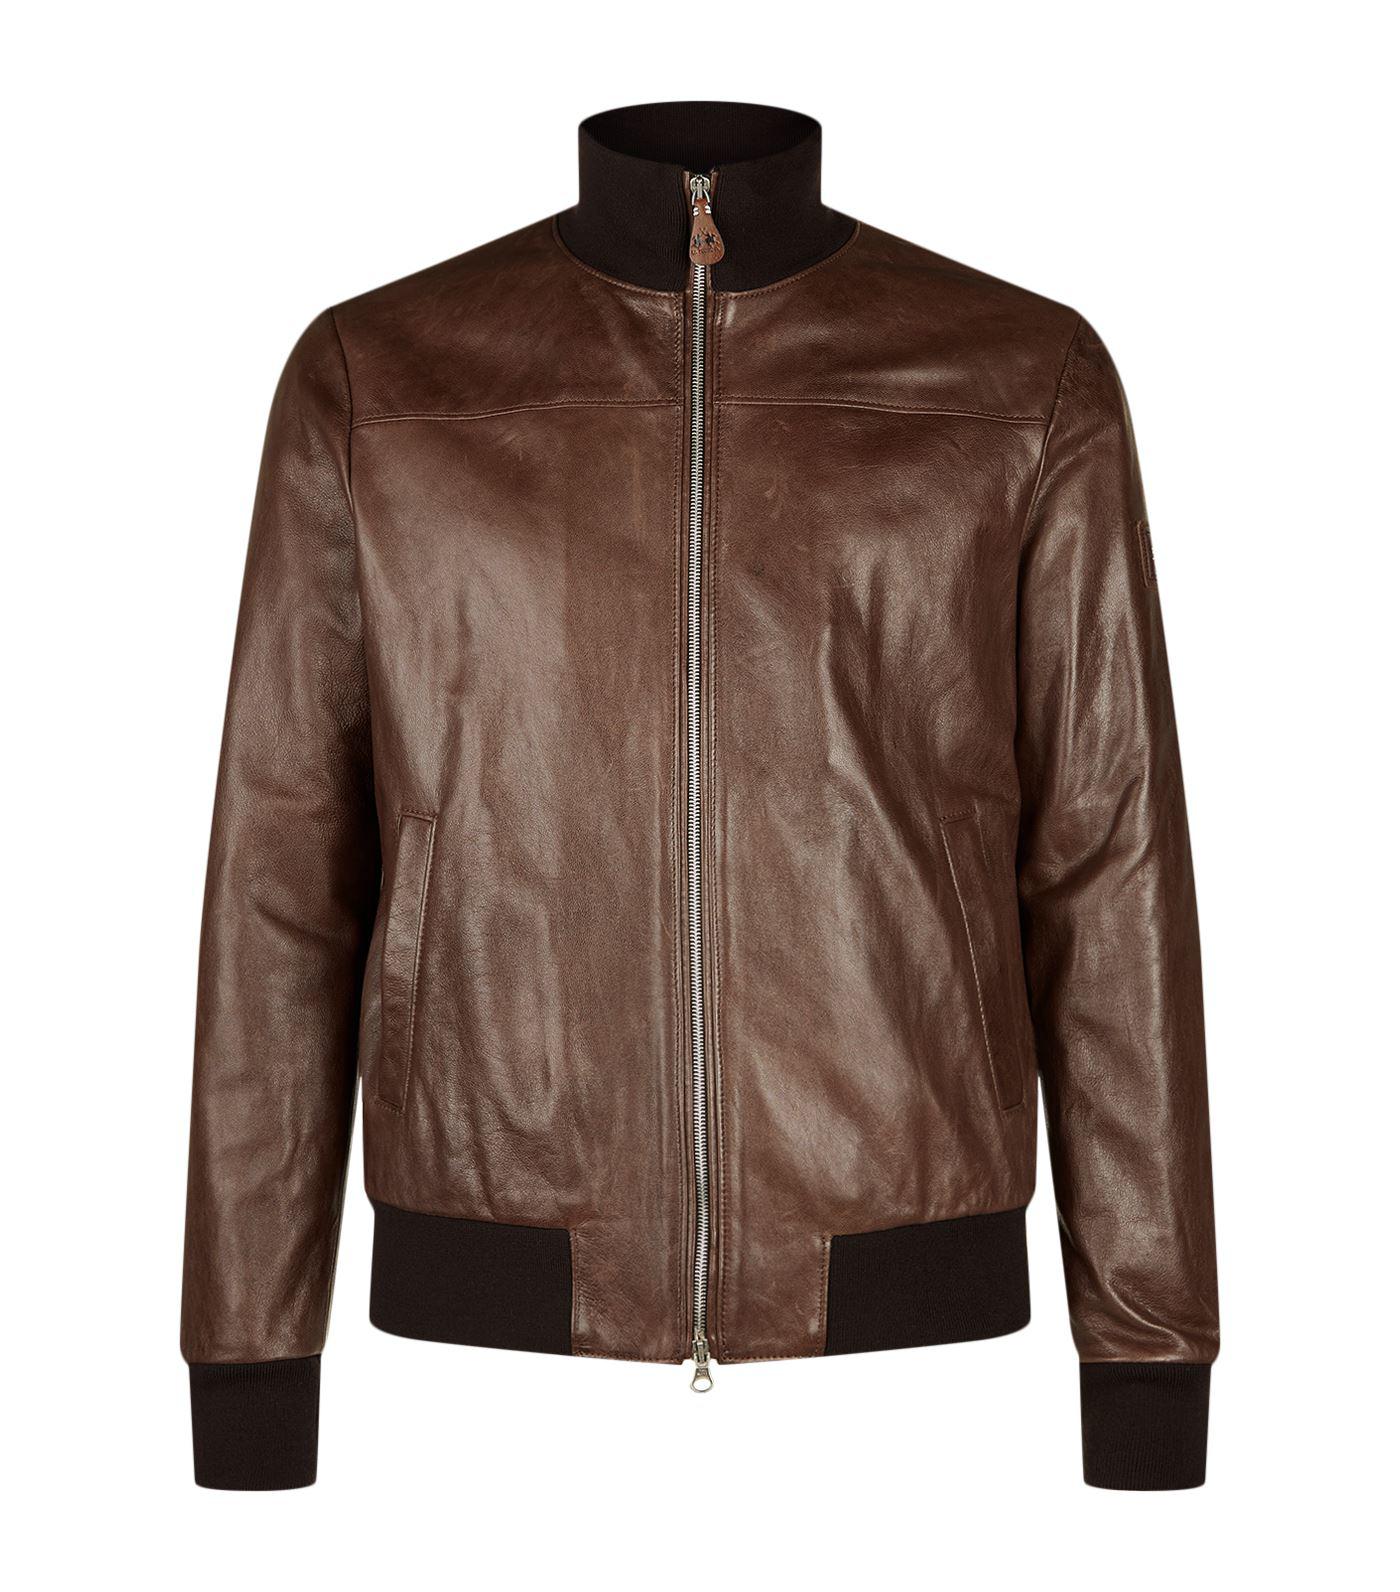 La Martina Leather Waxed Jacket in Brown for Men - Lyst